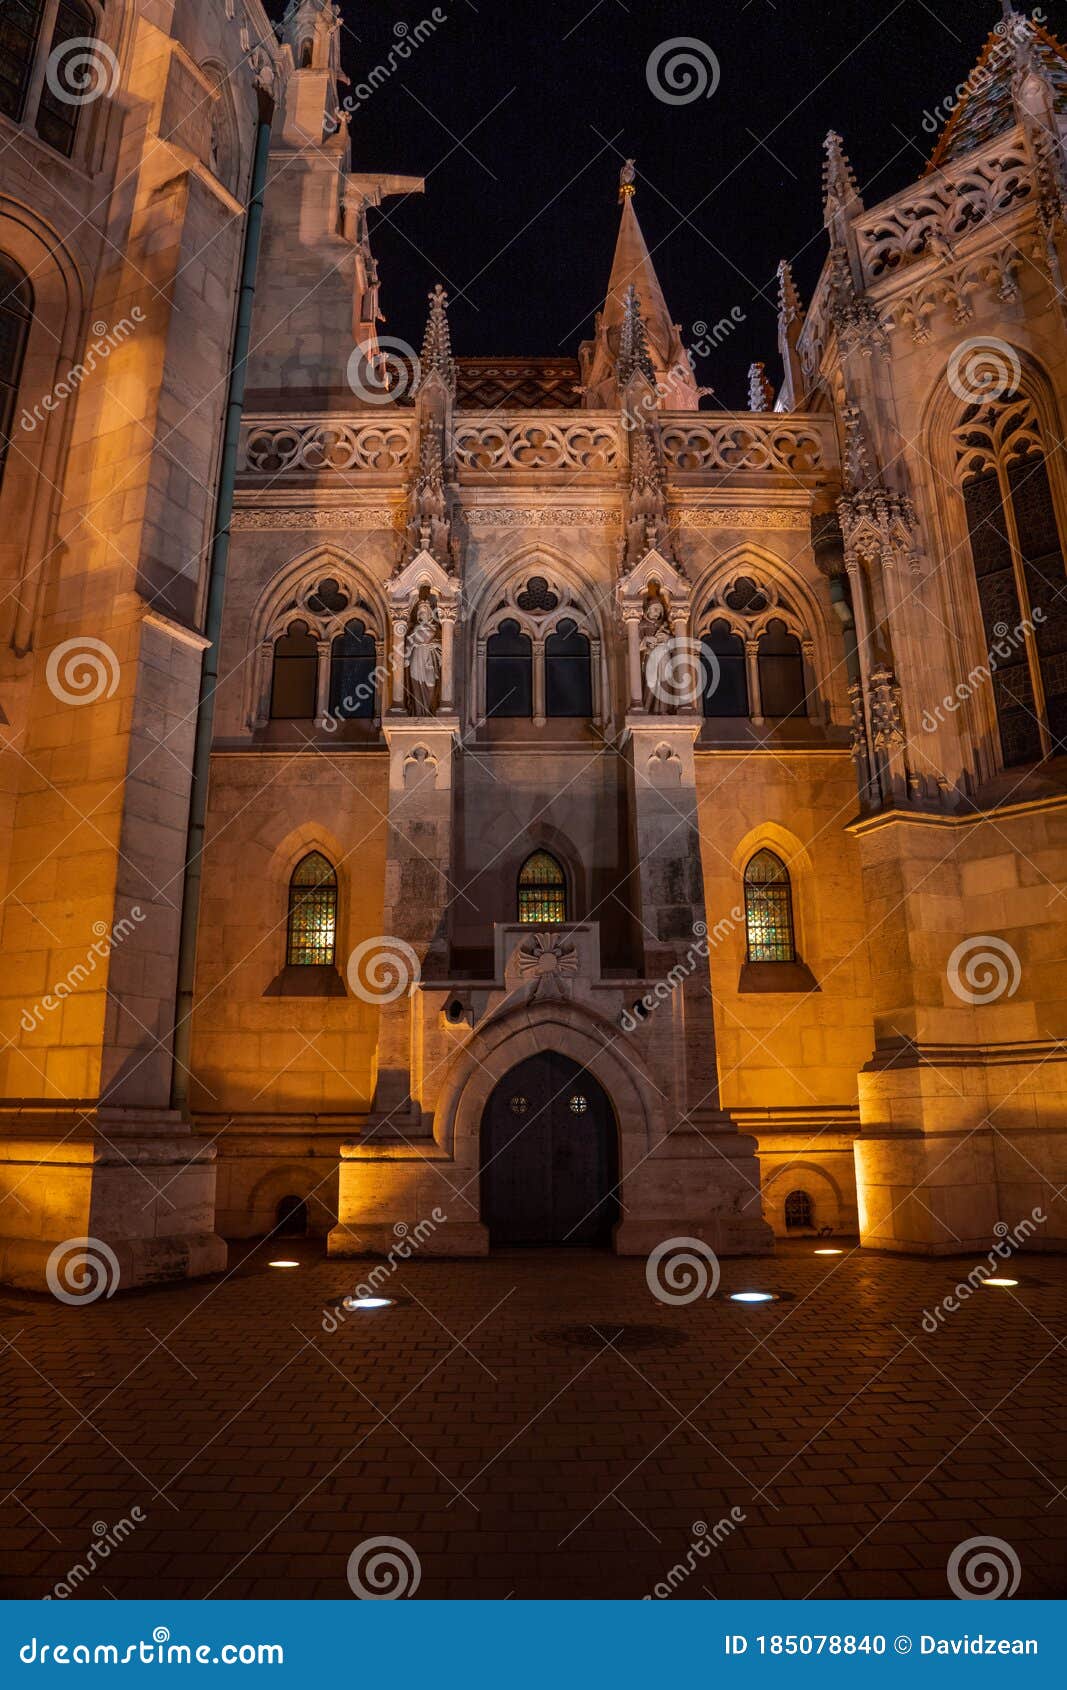 facade of matthias church at night with ligtht on budapest holy trinity square